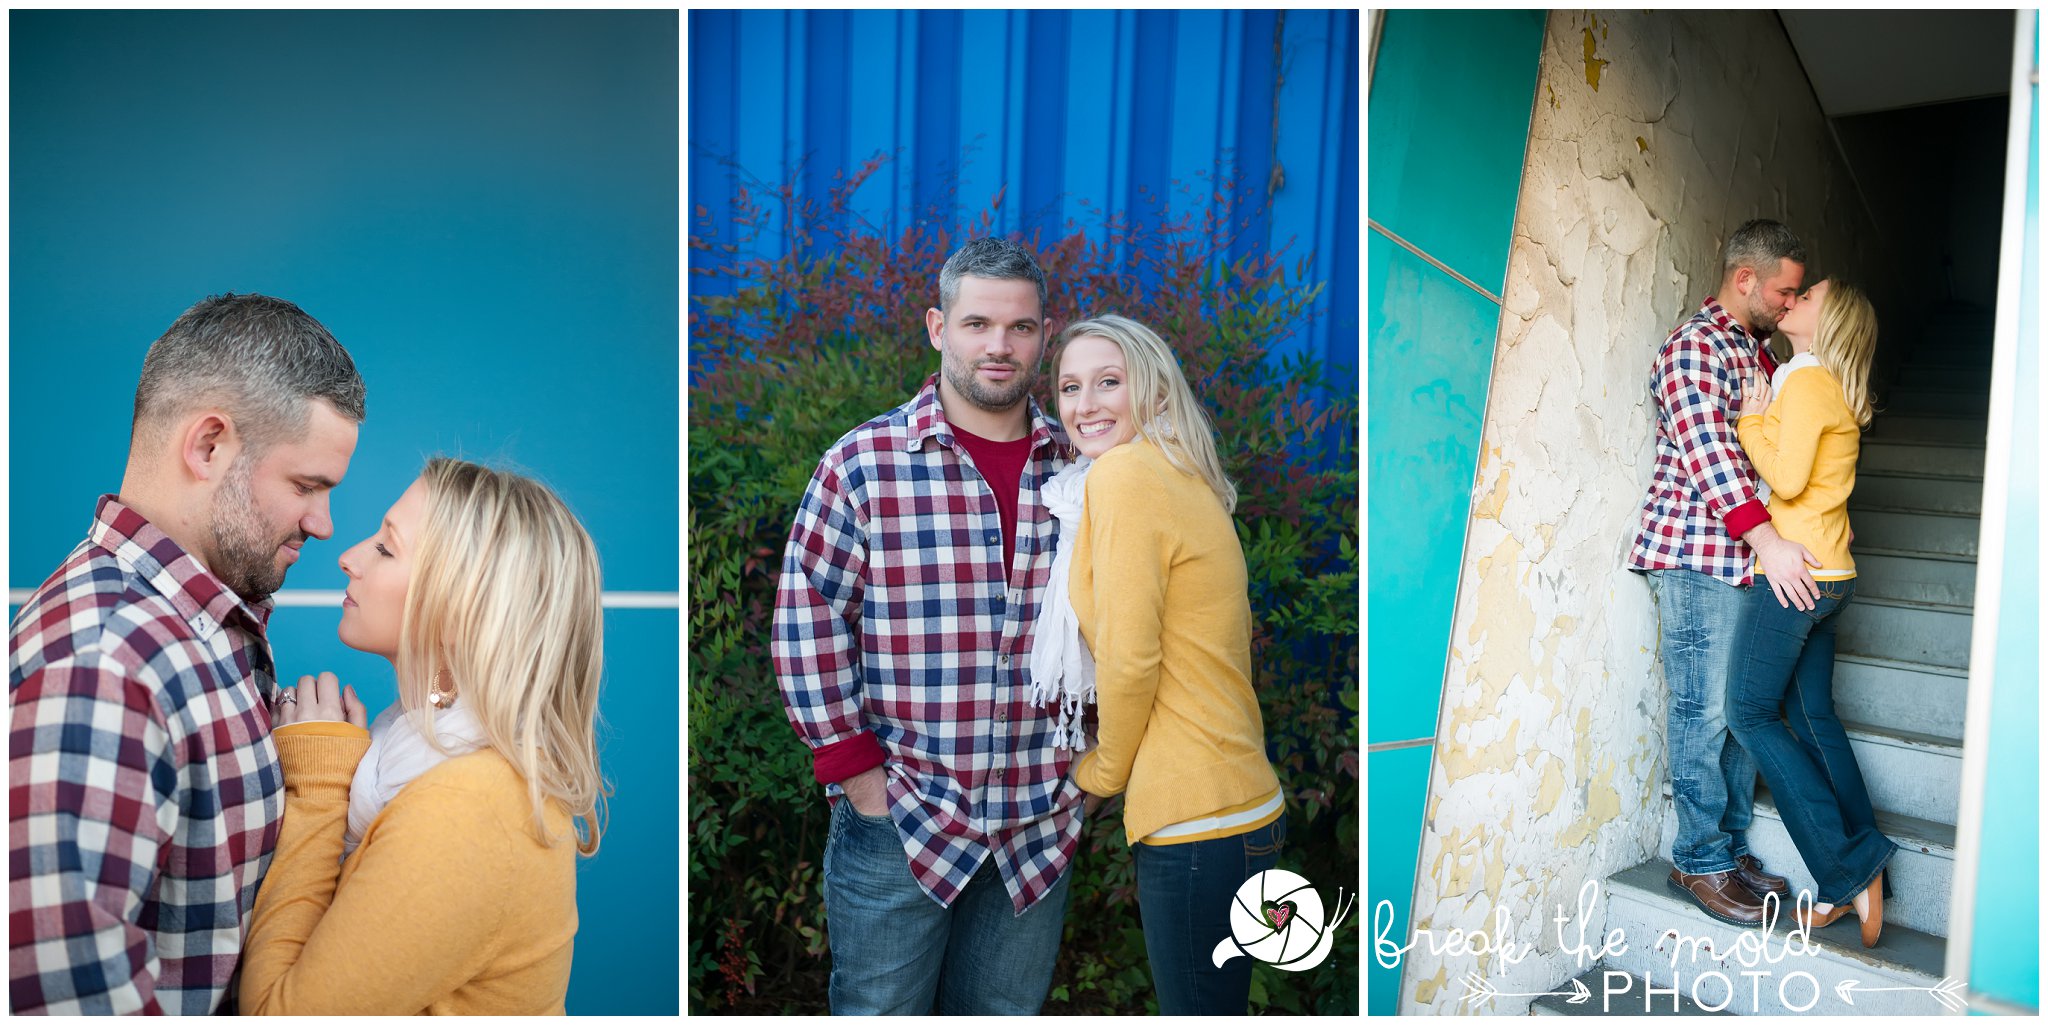 break-the-mold-photo-knoxville-tn-lenoir-city-downtown-outdoor-hiking-engagement-session_2018.jpg